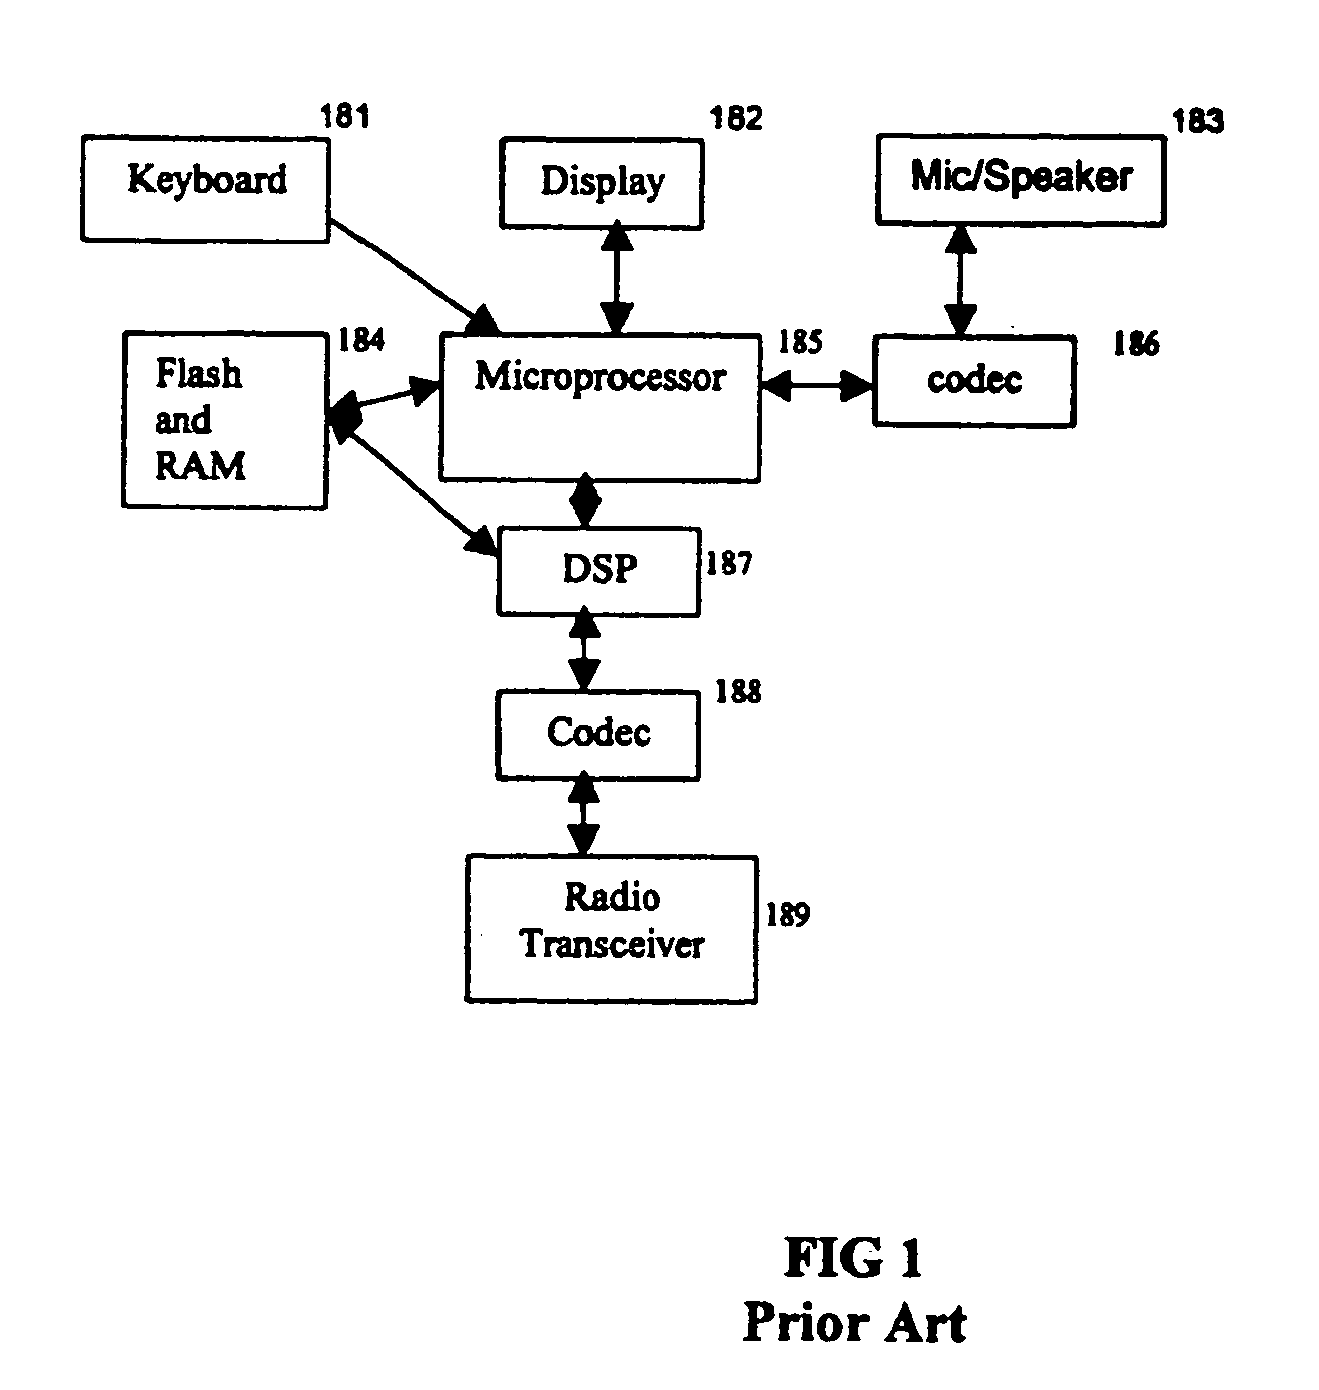 Architecture and protocol for a wireless communication network to provide scalable web services to mobile access devices